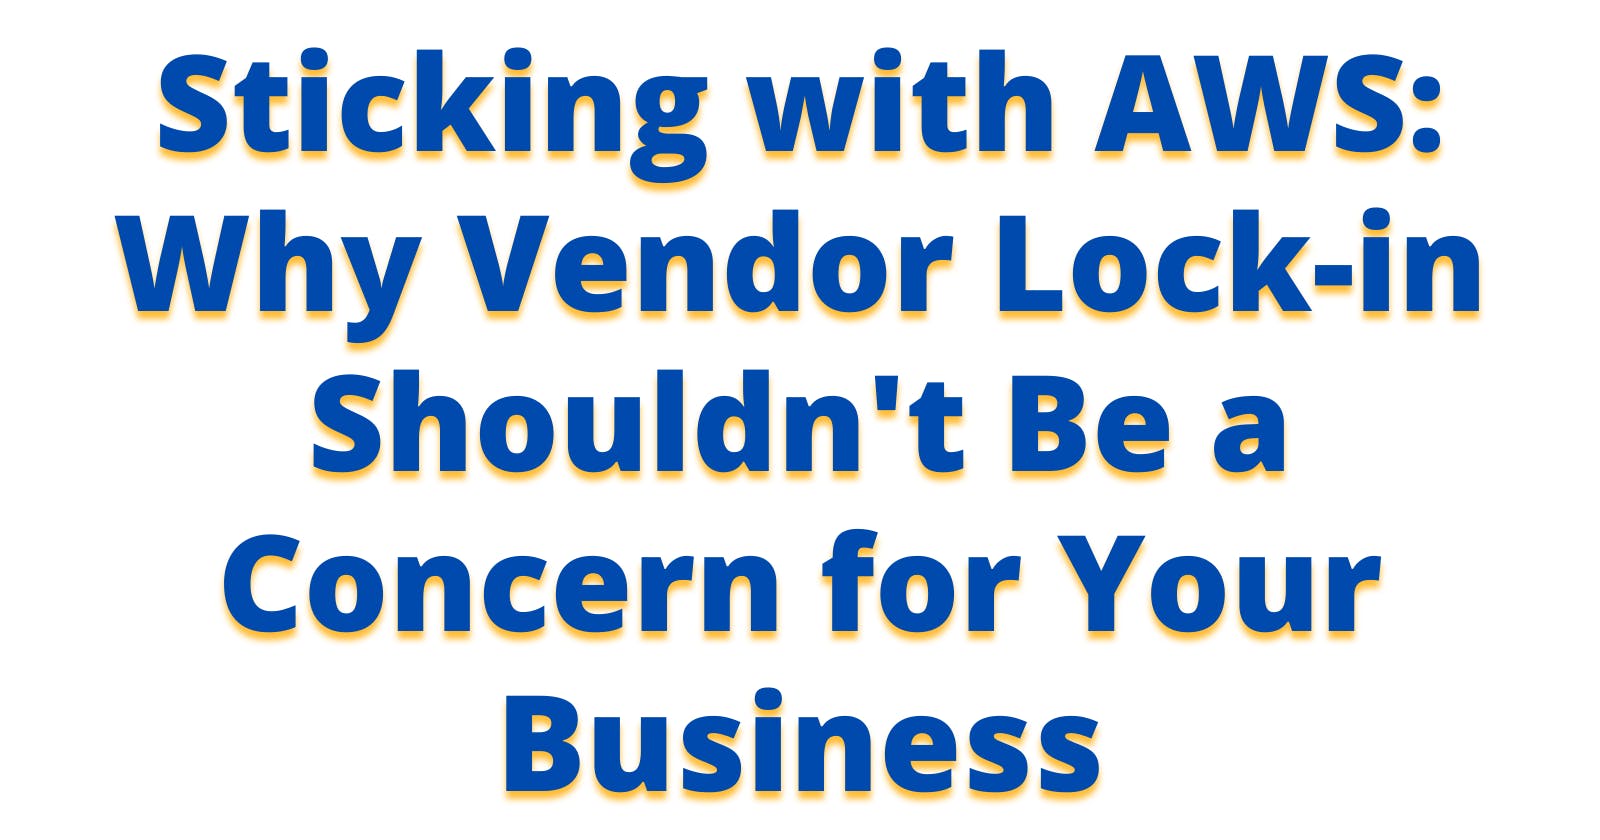 Sticking with AWS: Why Vendor Lock-in Shouldn't Be a Concern for Your Business